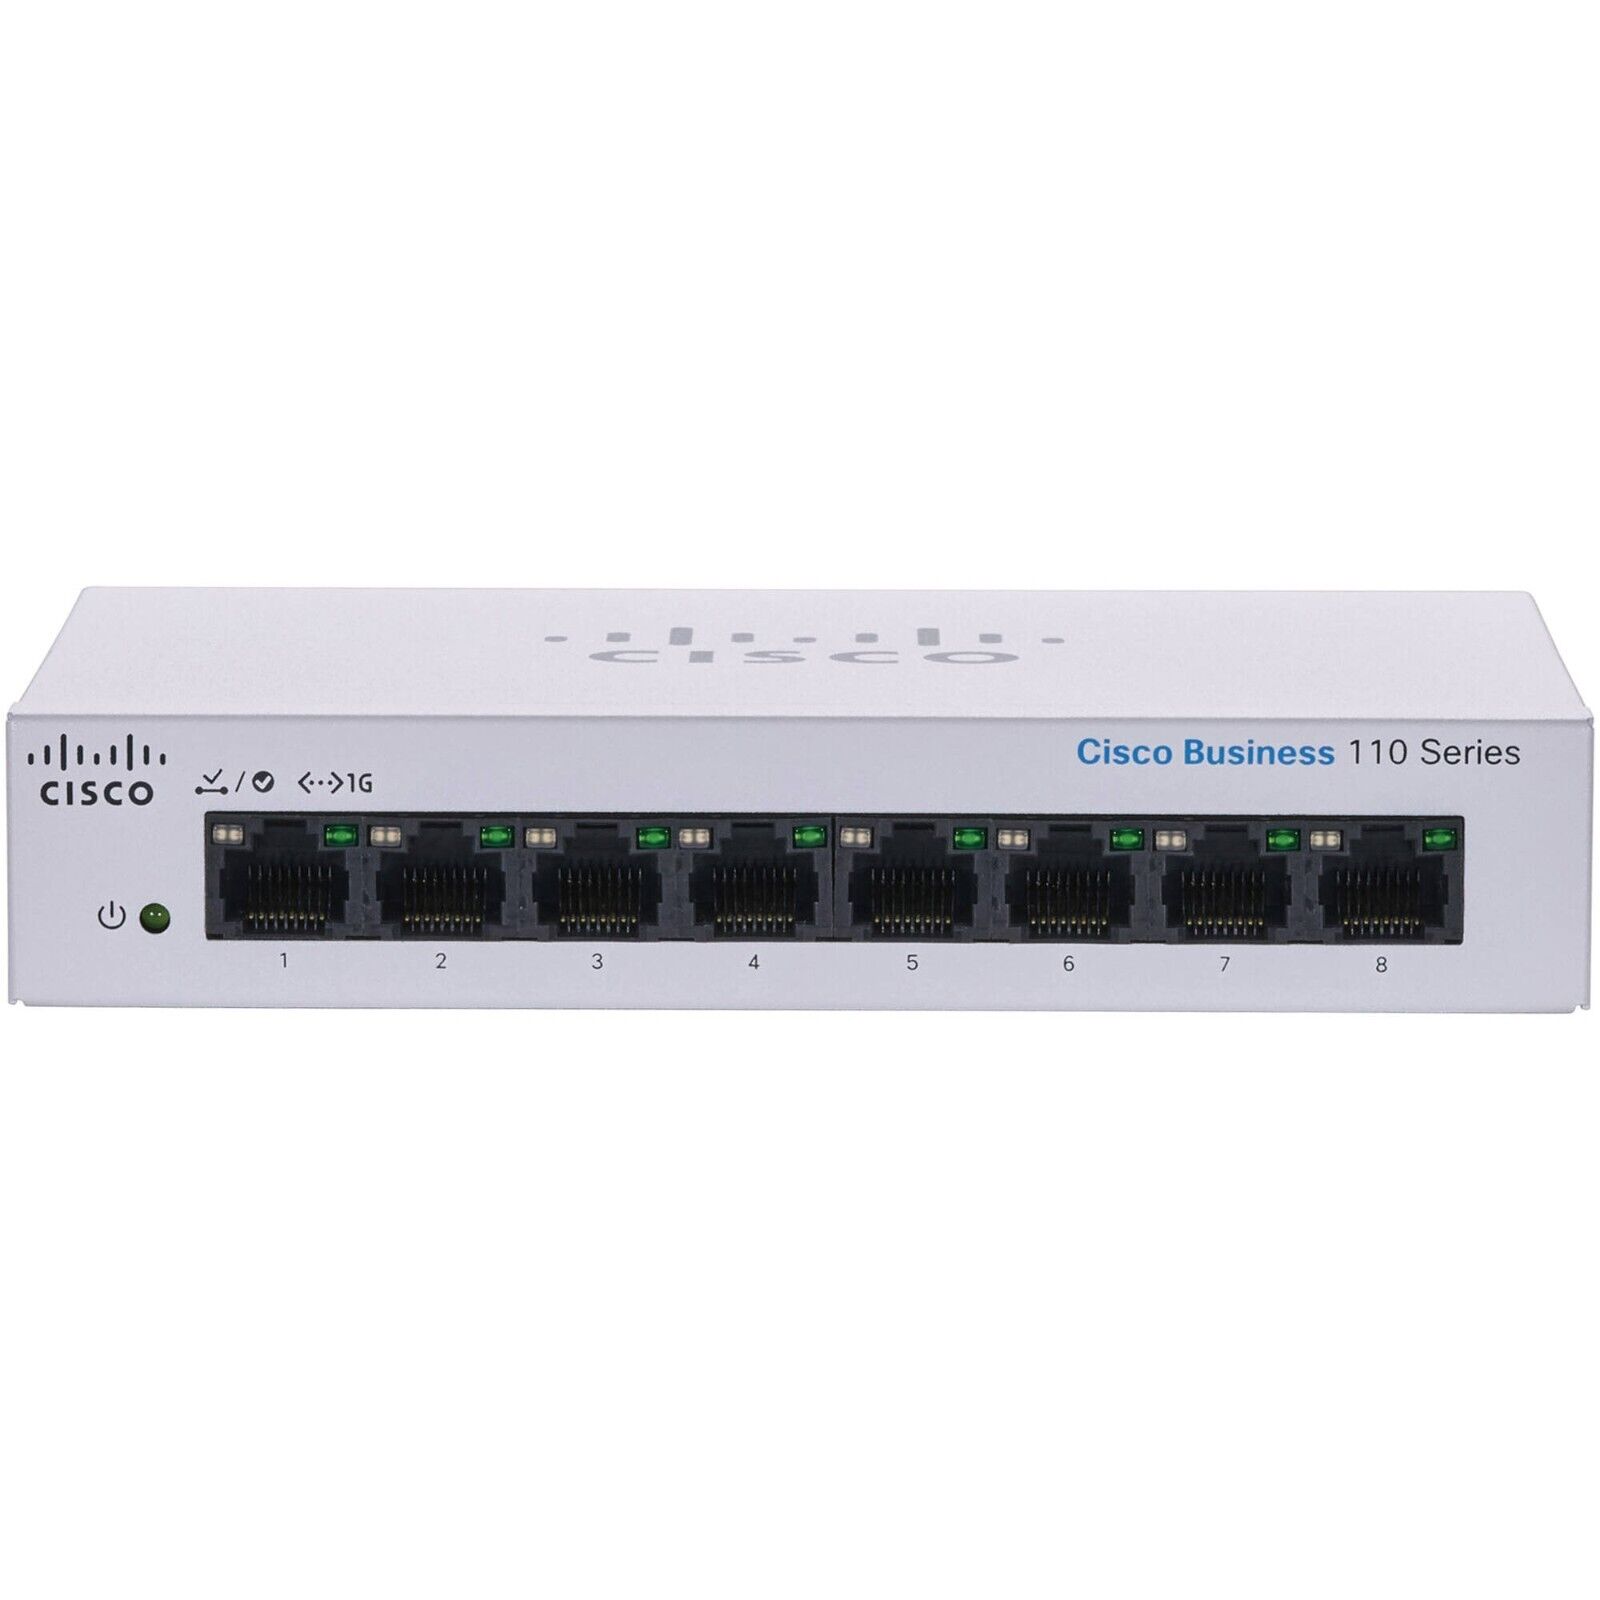 New Sealed Cisco CBS110-8T-D 8 Ports Unmanaged Switch